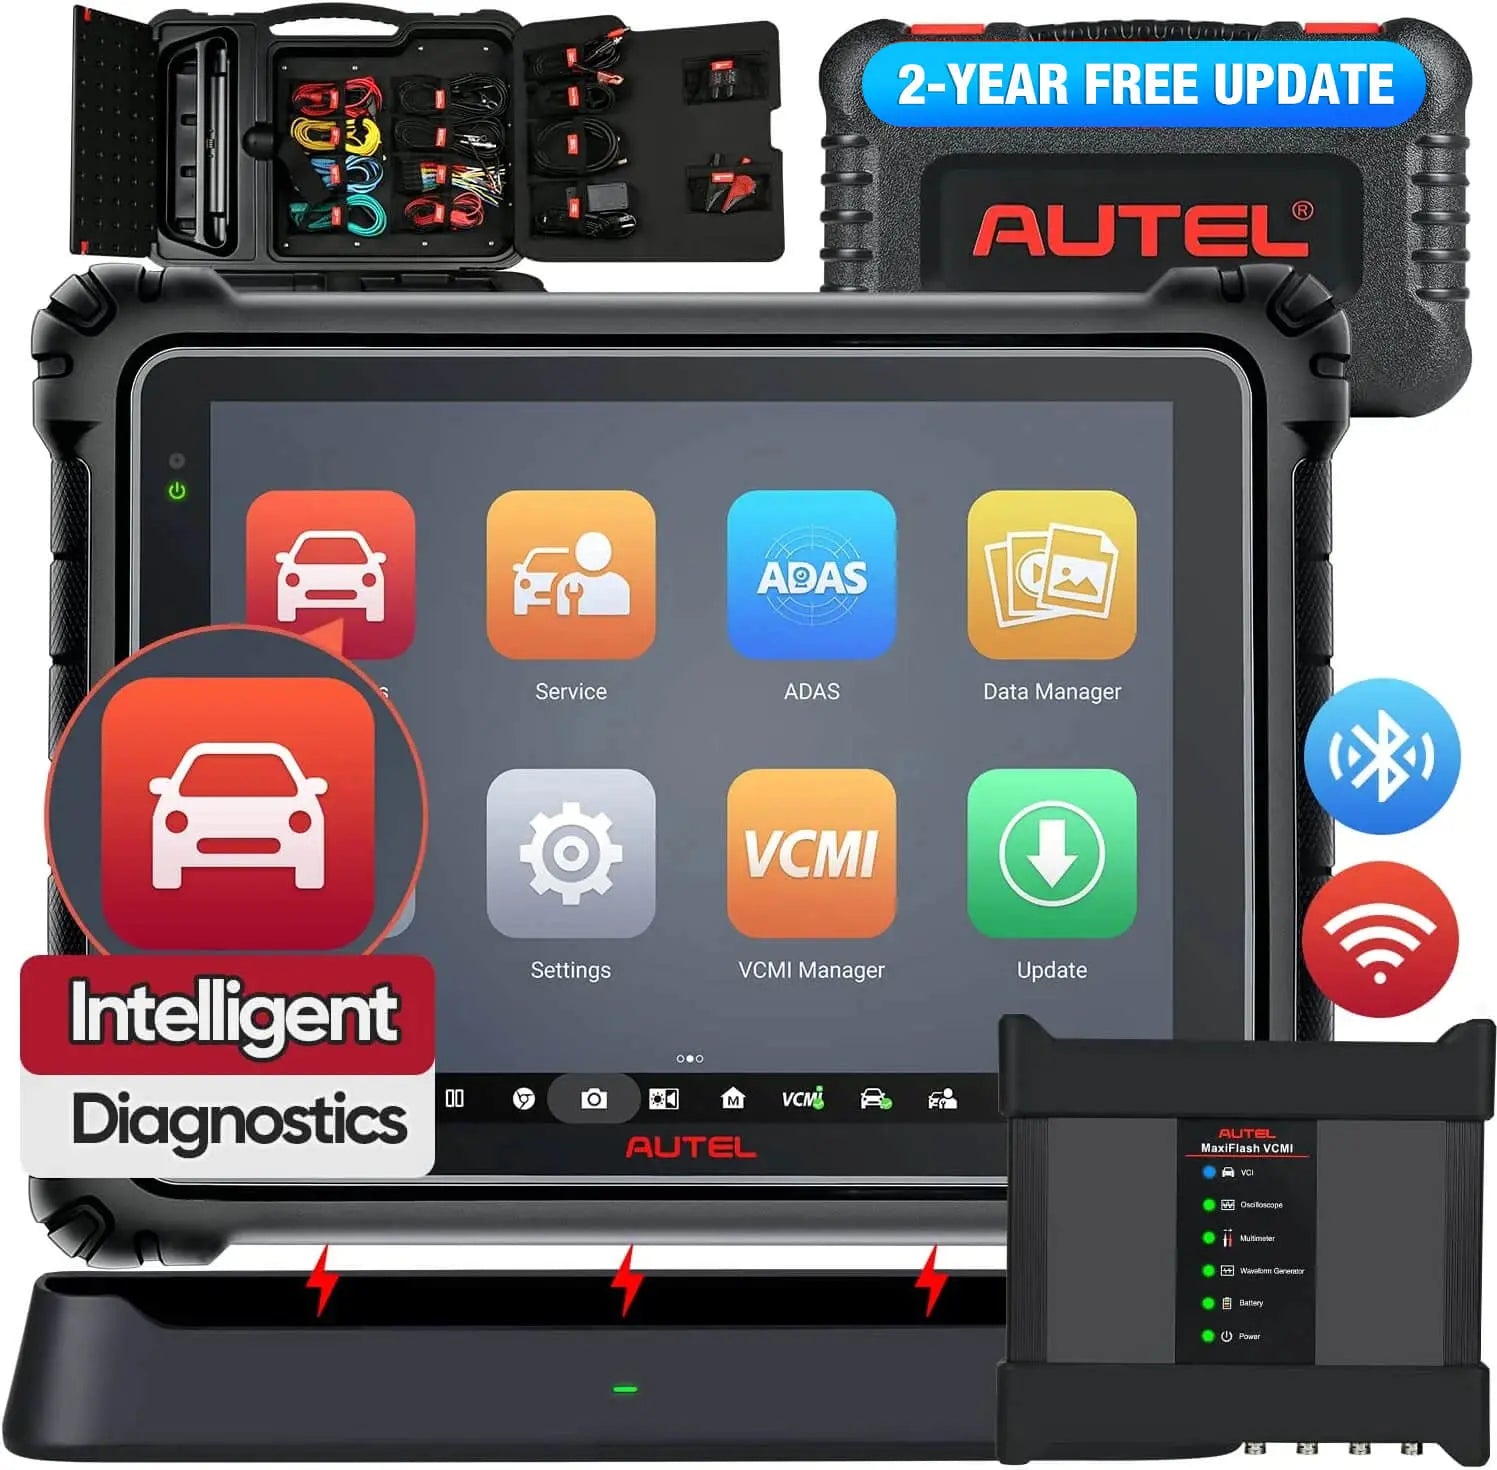 Autel MaxiSys Ultra 5in1 MaxiFlash VCMI Scanner, Intelligent Automotive Diagnostic Scan Tool for Car, High-end ECU Programming & Coding, 40+ Repair Functions, Upgrade of Maxisys Elite/MS909/MS919